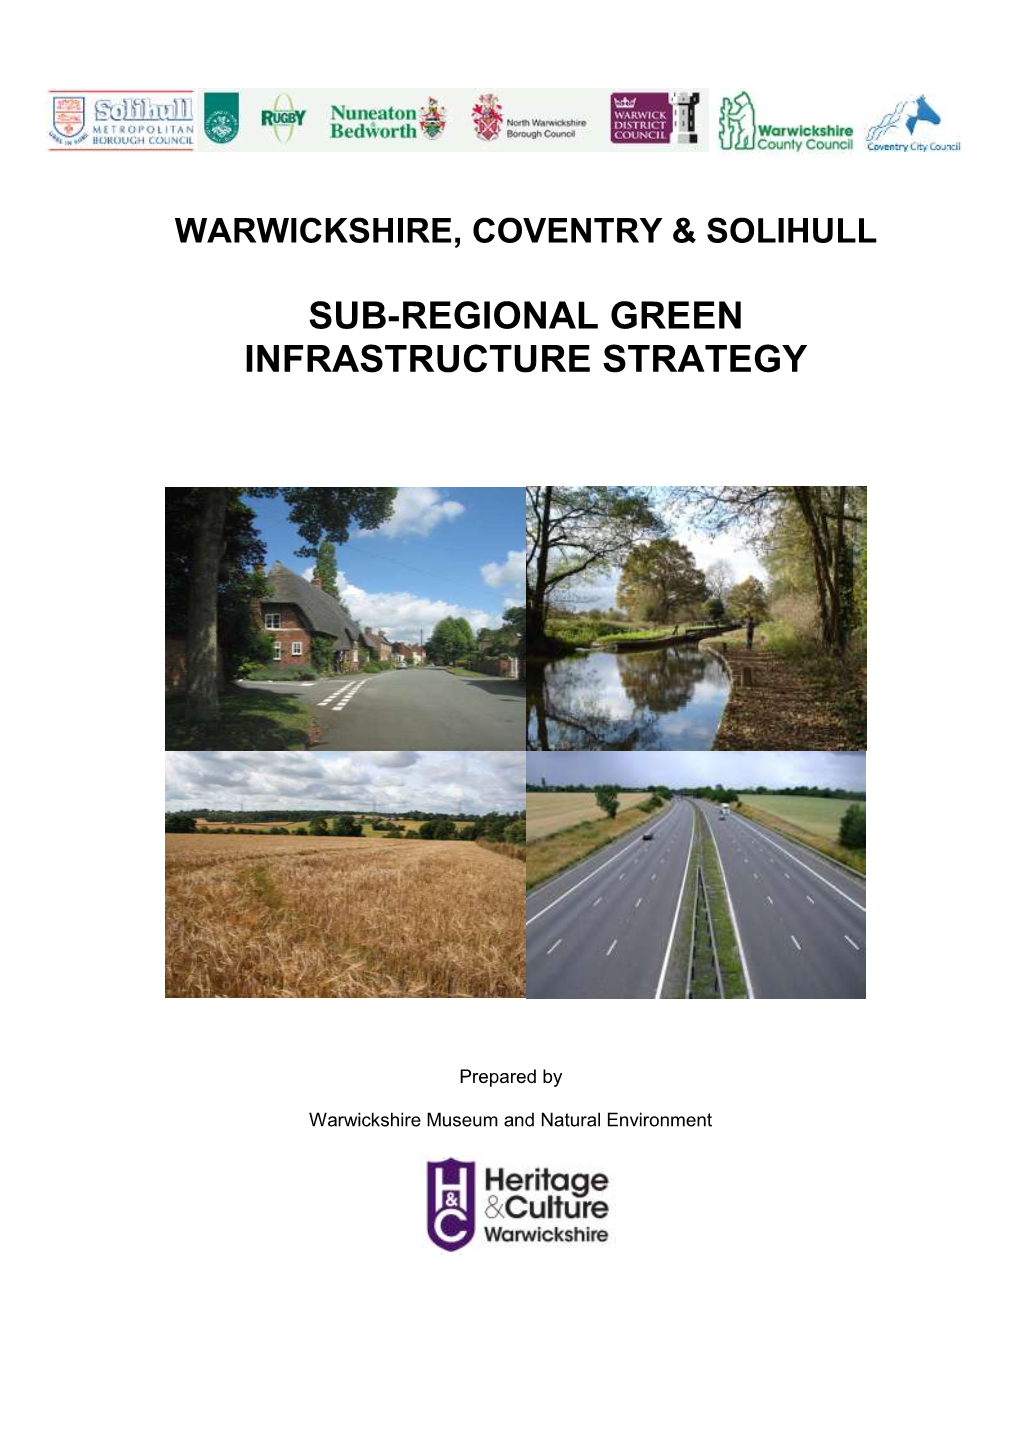 Warwickshire, Coventry & Solihull Sub-Regional Green Infrastructure